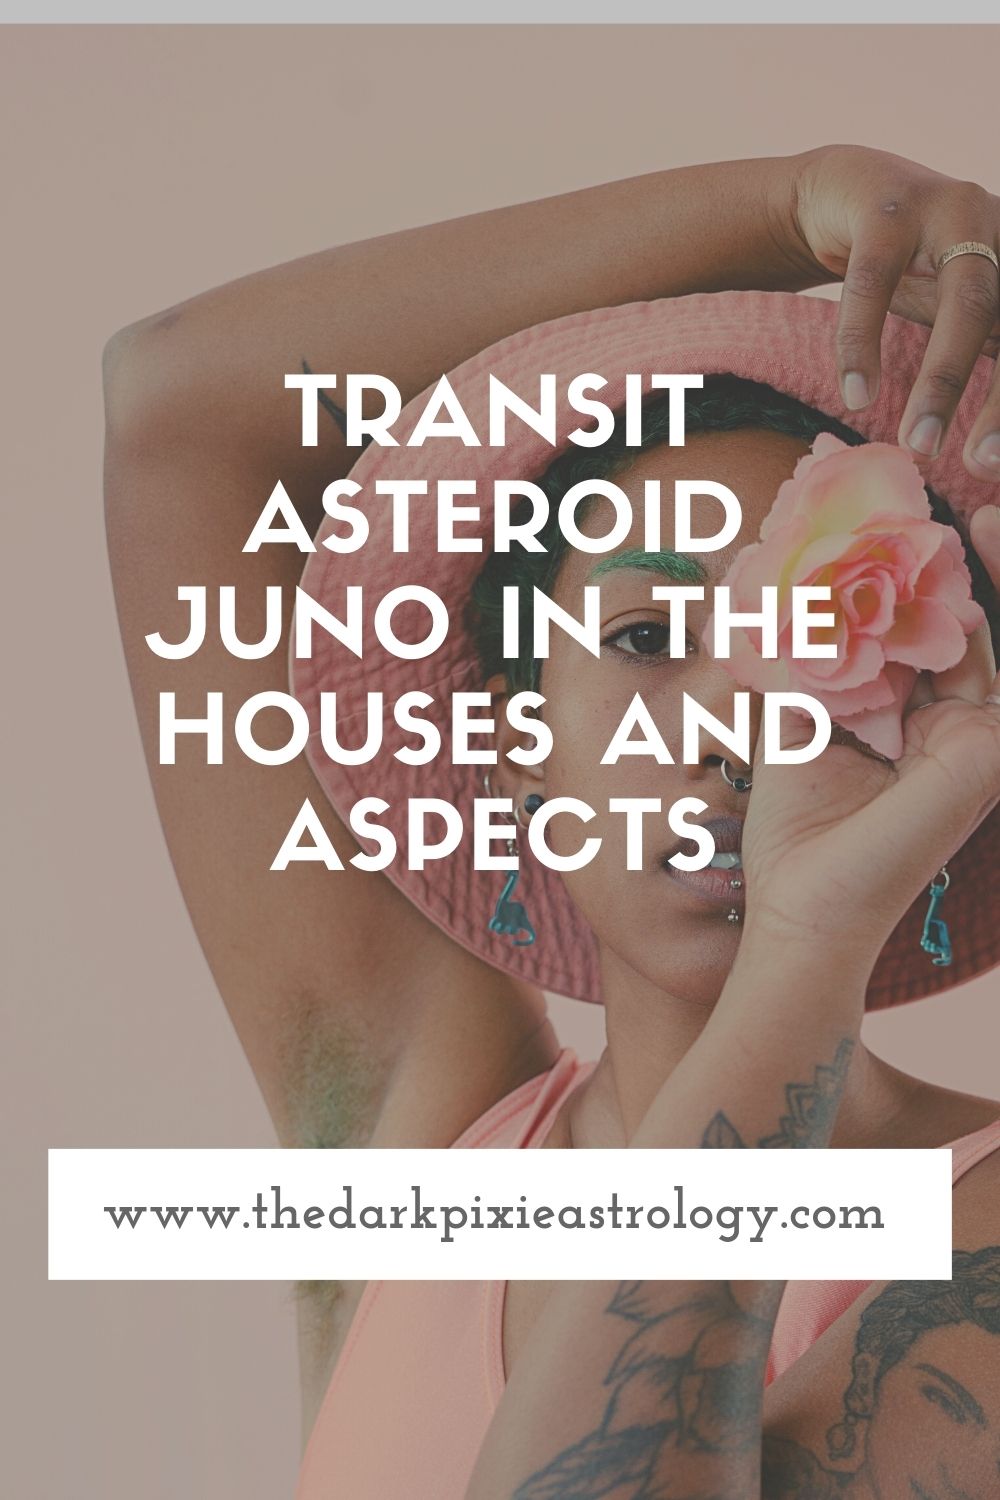 Transit Asteroid Juno in the Houses and Aspects - The Dark Pixie Astrology